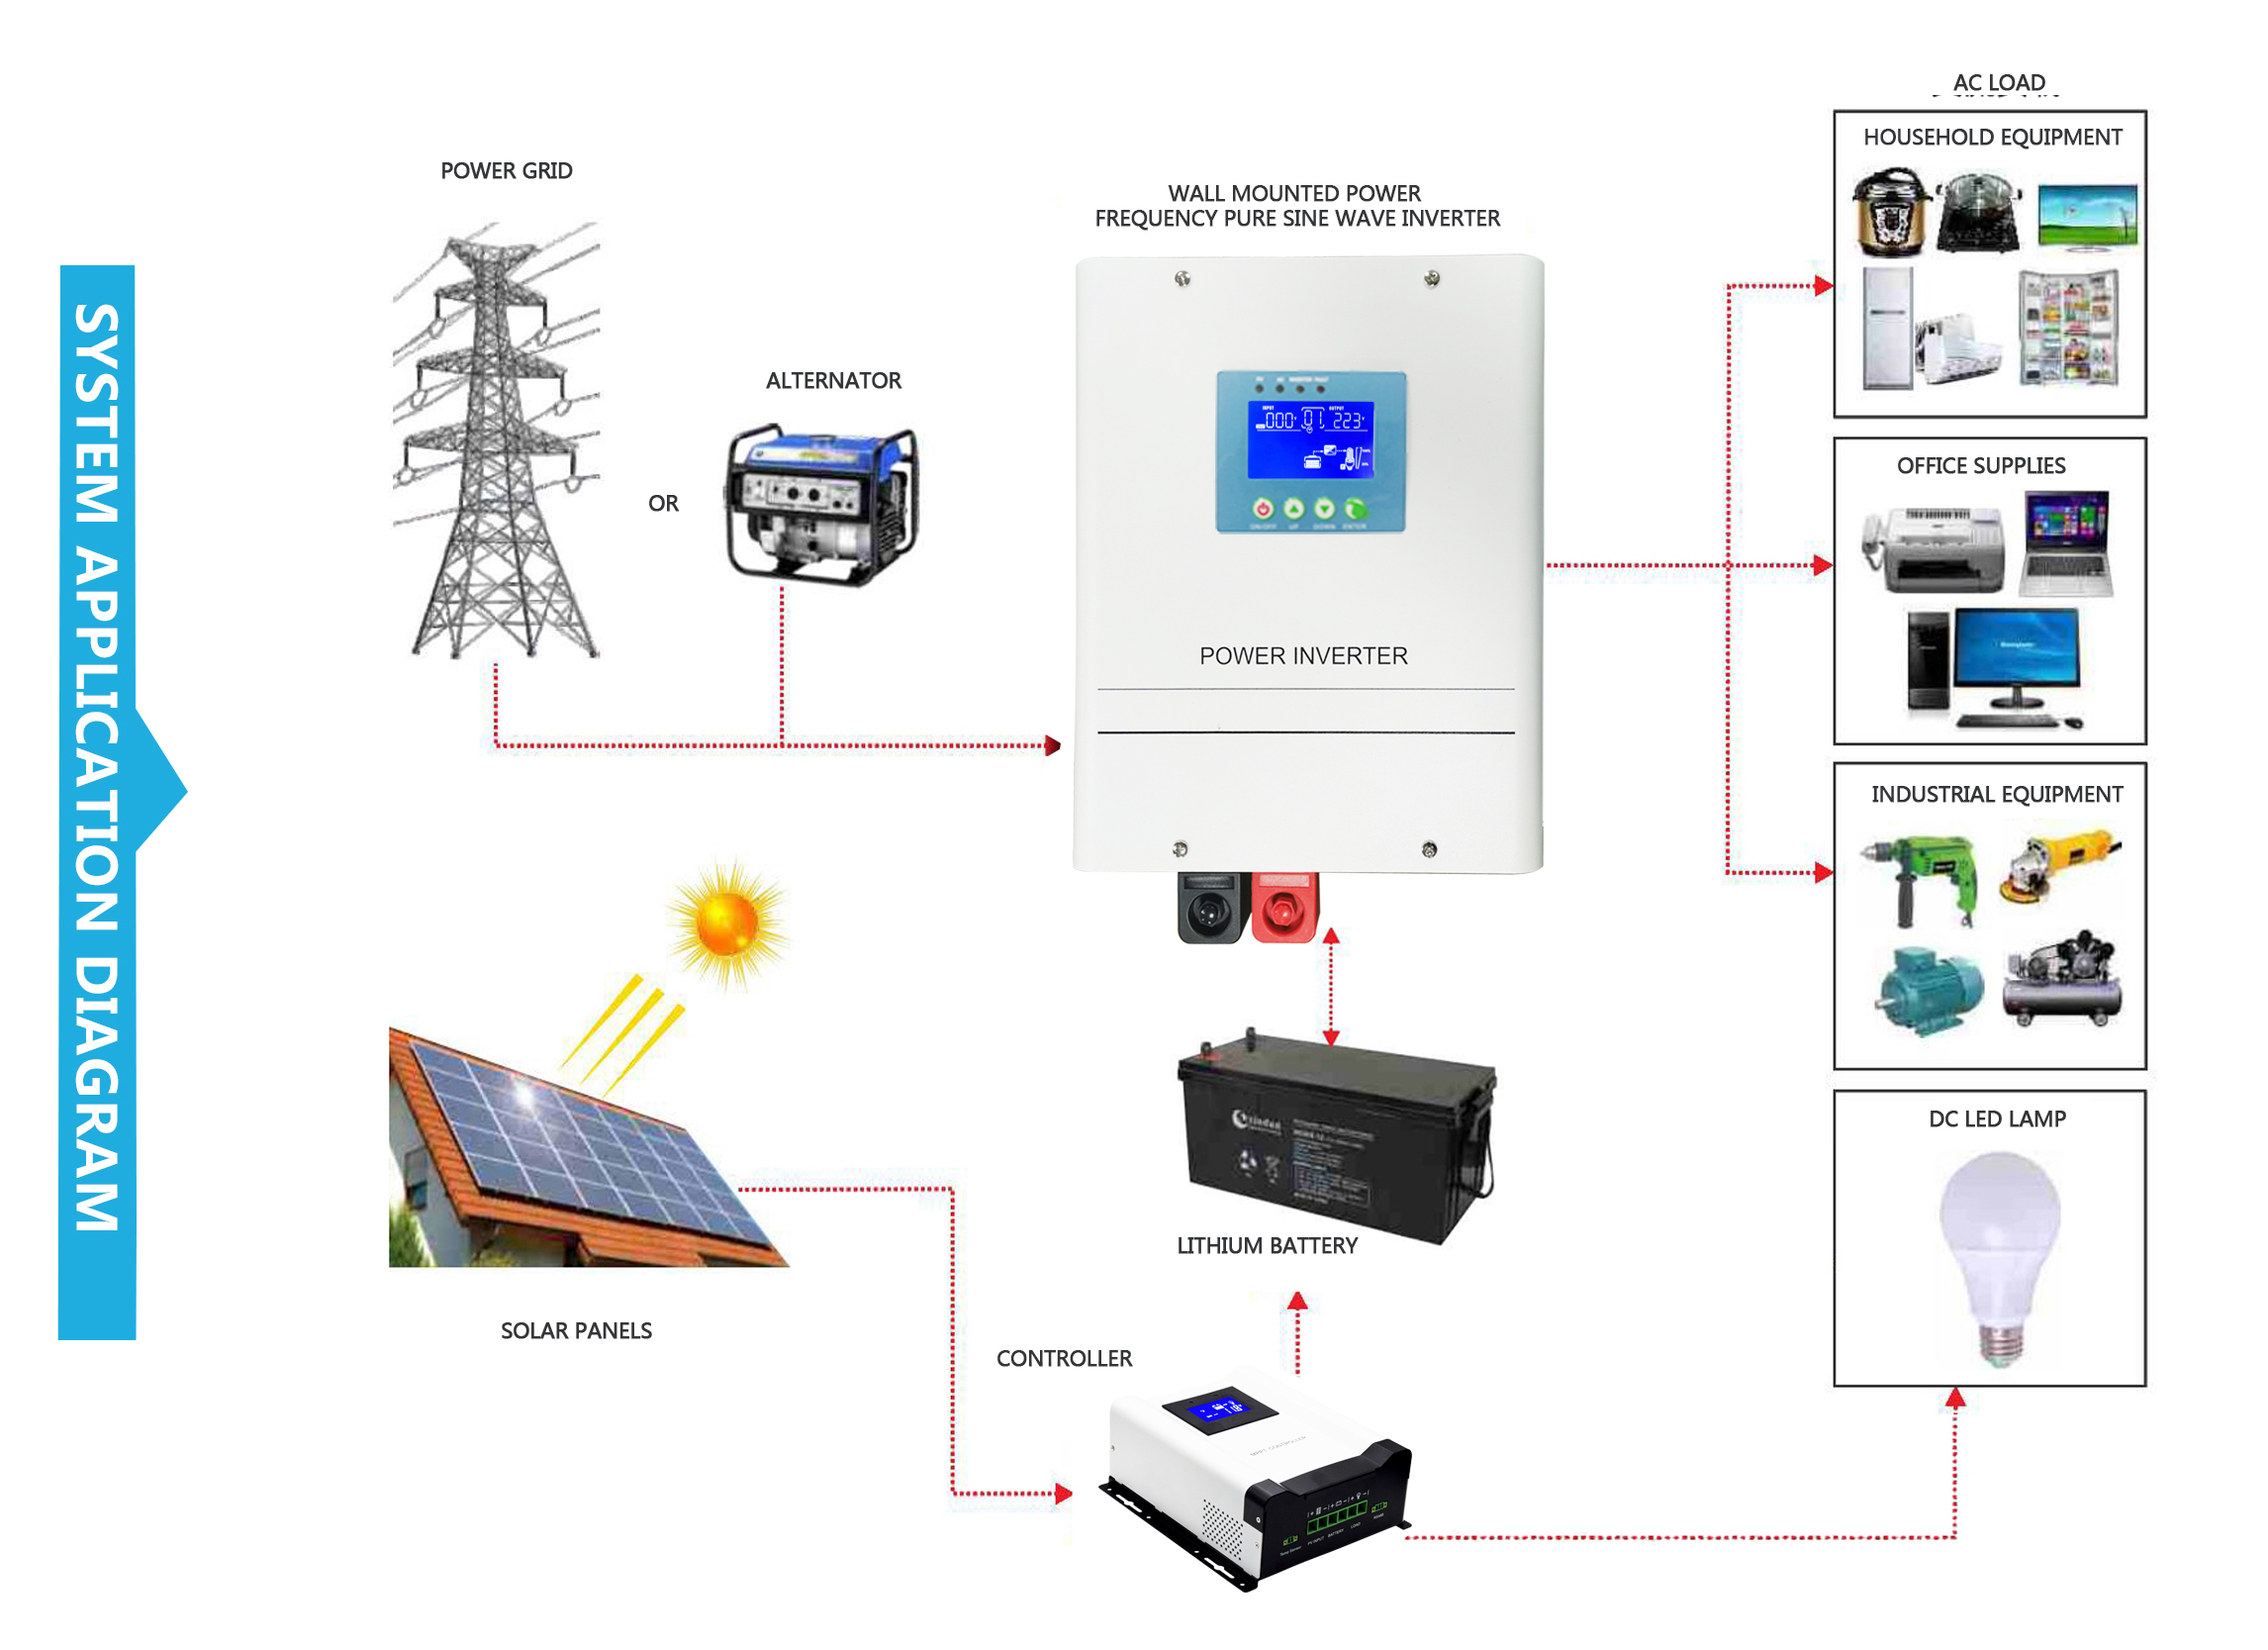 HX  Power Frequency Wall Mounted Inverter Solar Inverter For Home/ Office Equipment Off